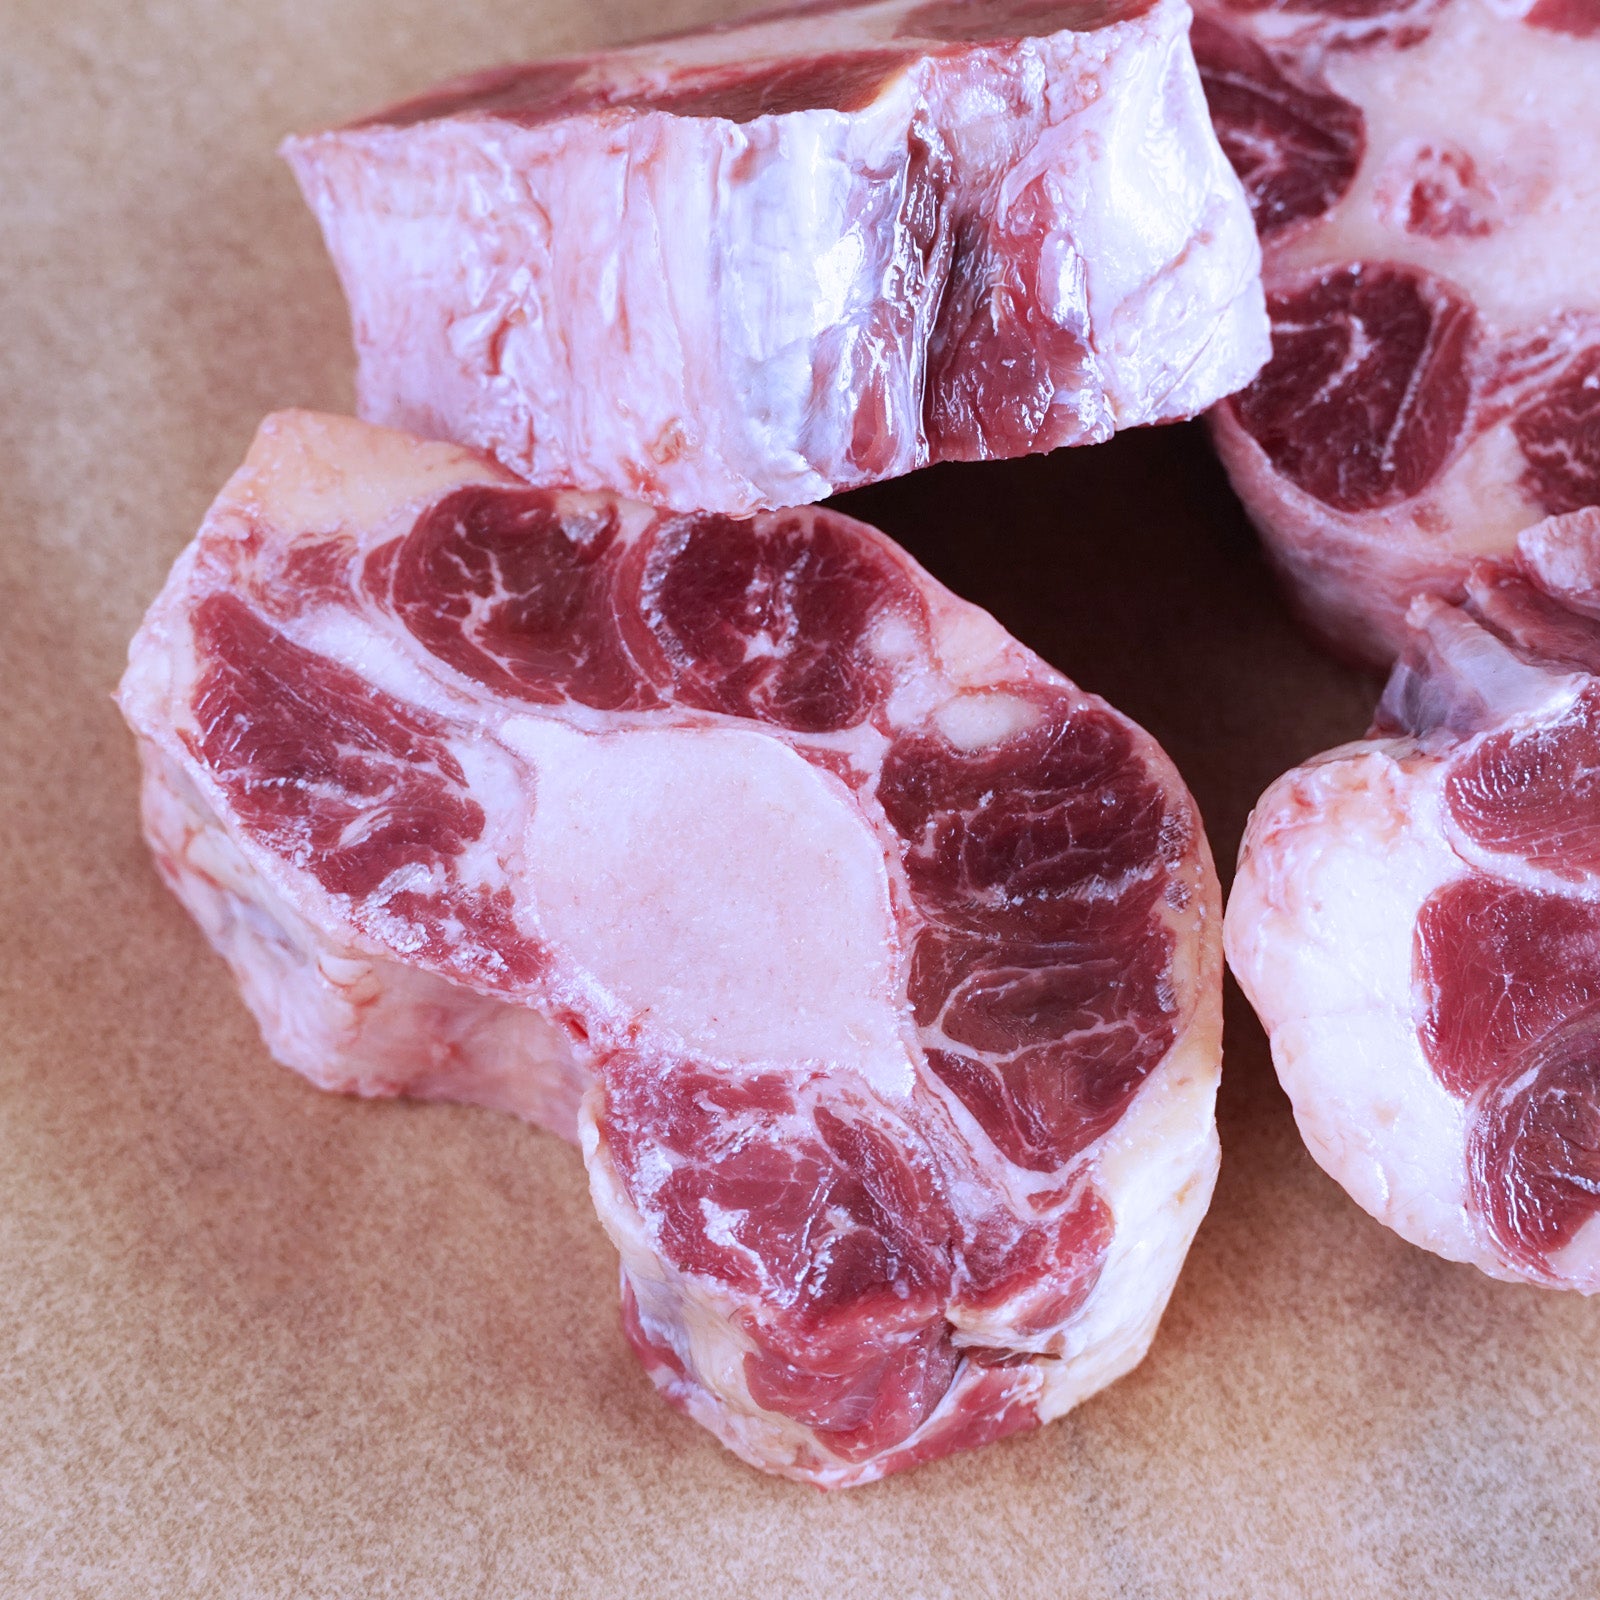 Grass-Fed Beef Tail Cuts / Oxtails for Bone Broth from Australia (500g) - Horizon Farms